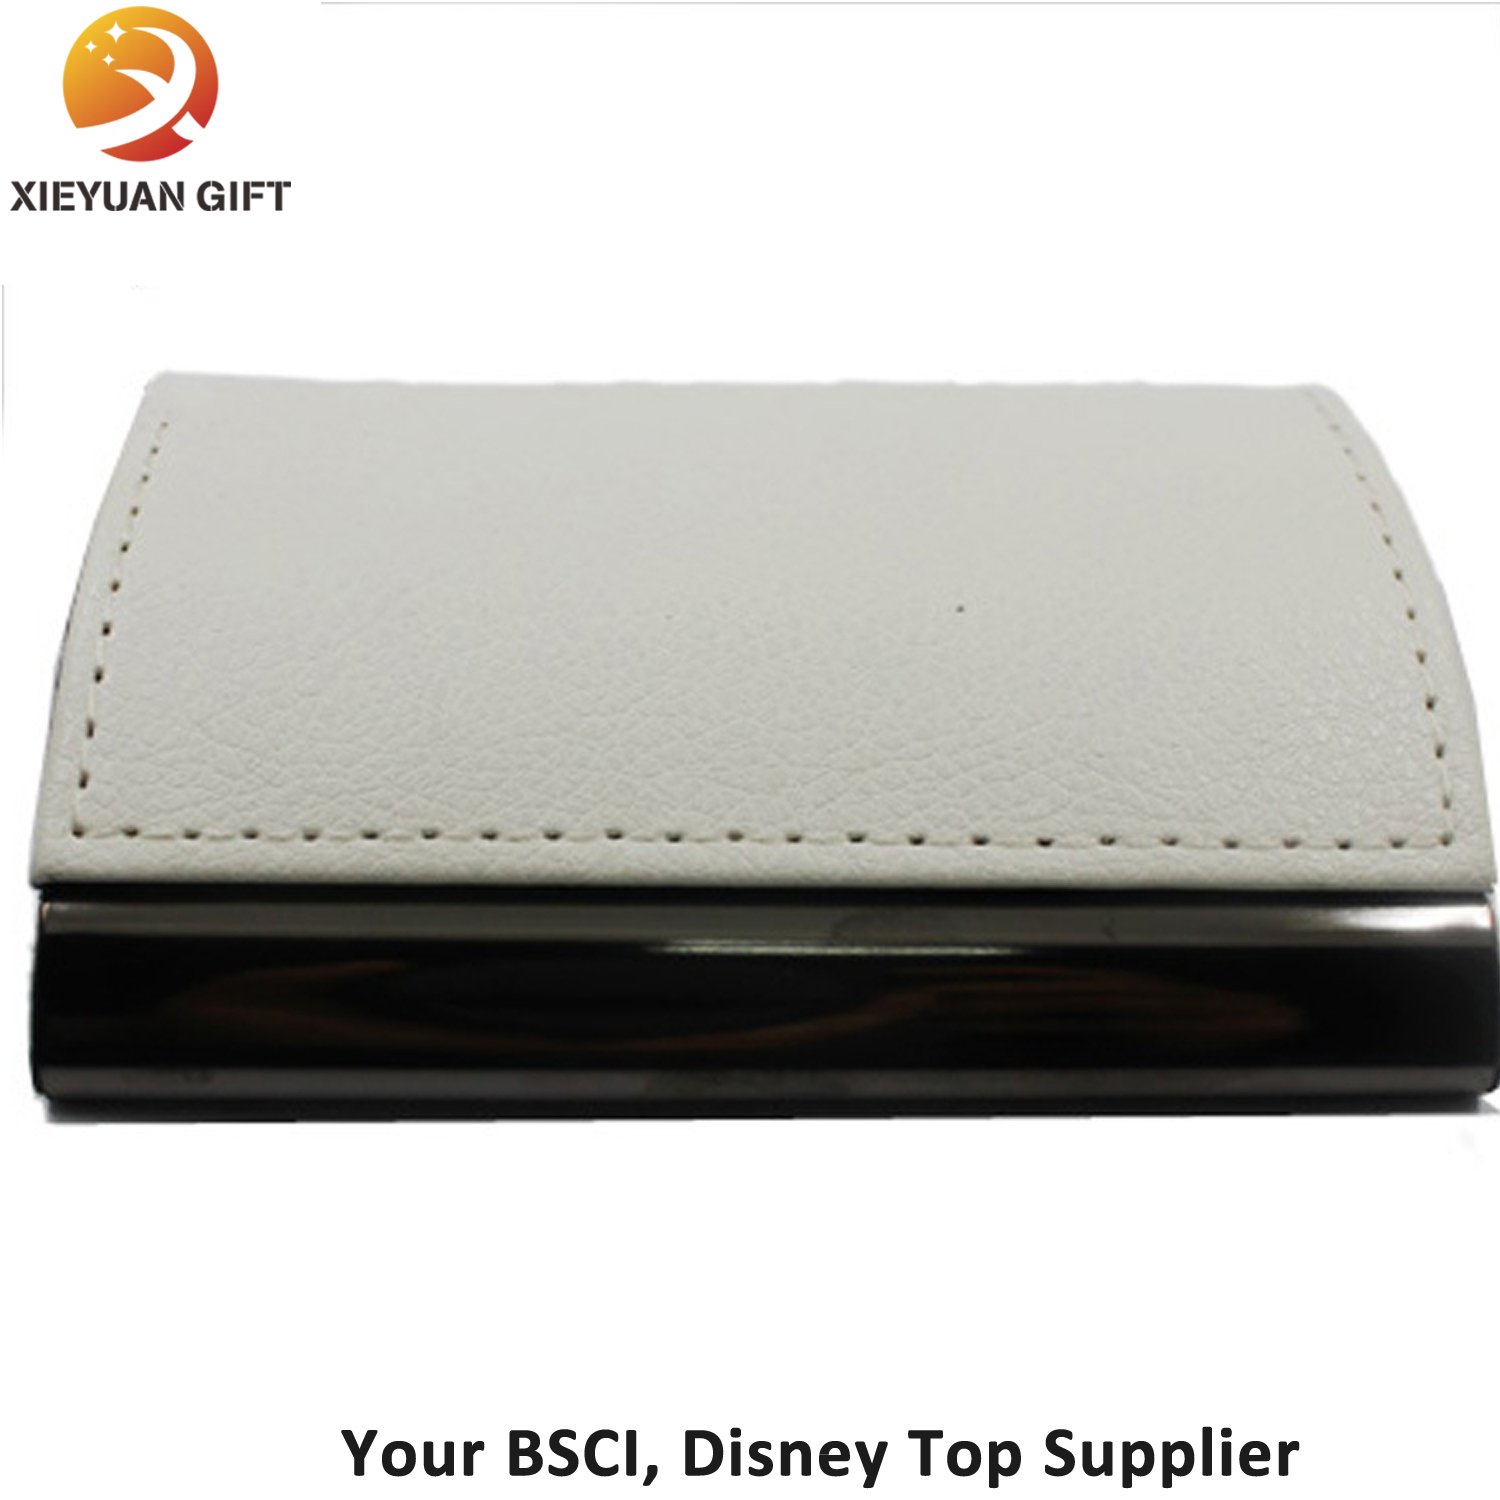 White Leather Business Card Holder Metal Name Card ID Card Holder